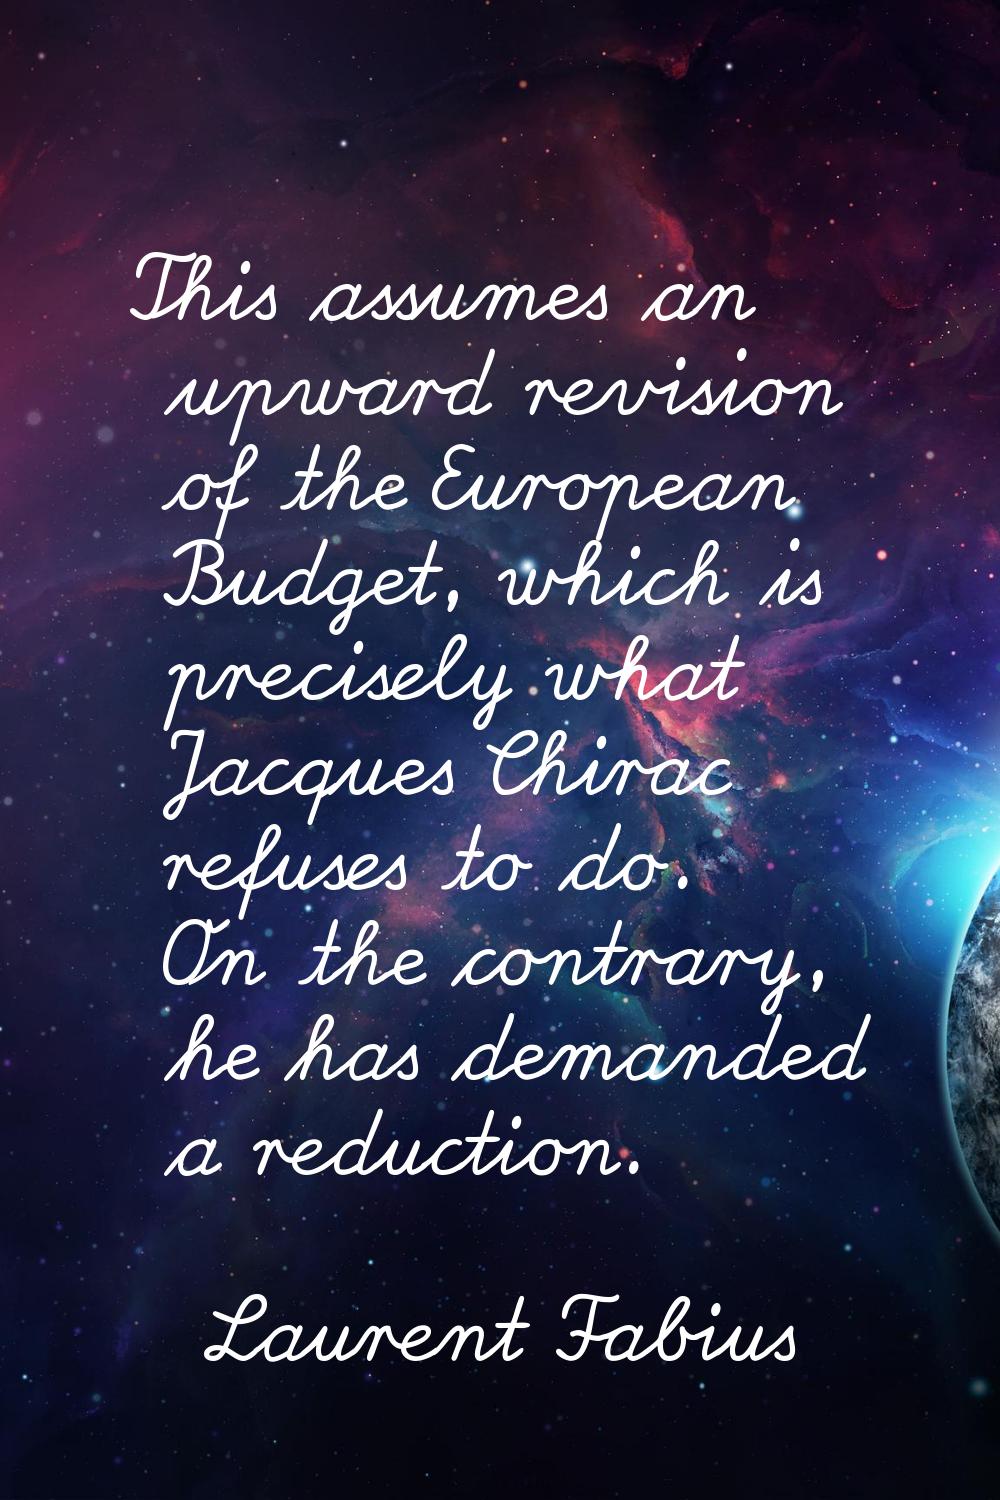 This assumes an upward revision of the European Budget, which is precisely what Jacques Chirac refu